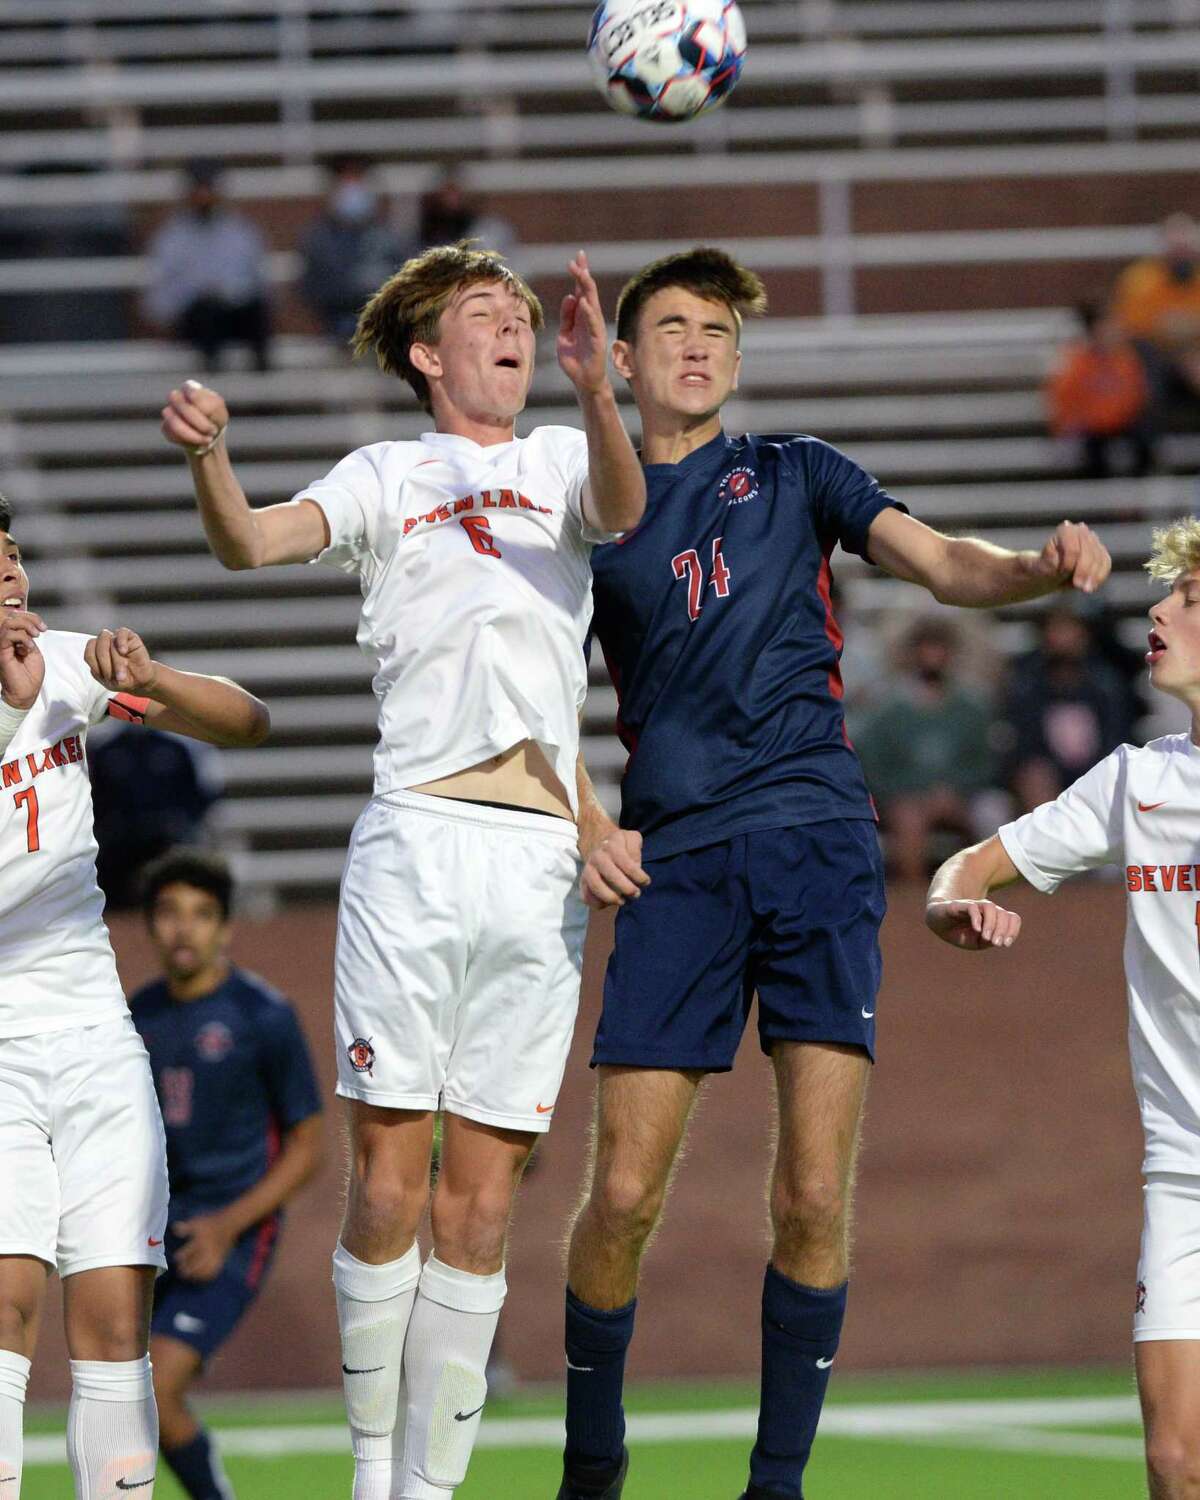 Aidan Morrison (6) of Seven Lakes and Ian Aumagher (24) of Tompkins head a ball during the first half of a 6A-III regional quarterfinal soccer match between the Seven Lakes Spartans and the Tompkins Falcons on Friday, April 2, 2021 at Legacy Stadium, Katy, TX.